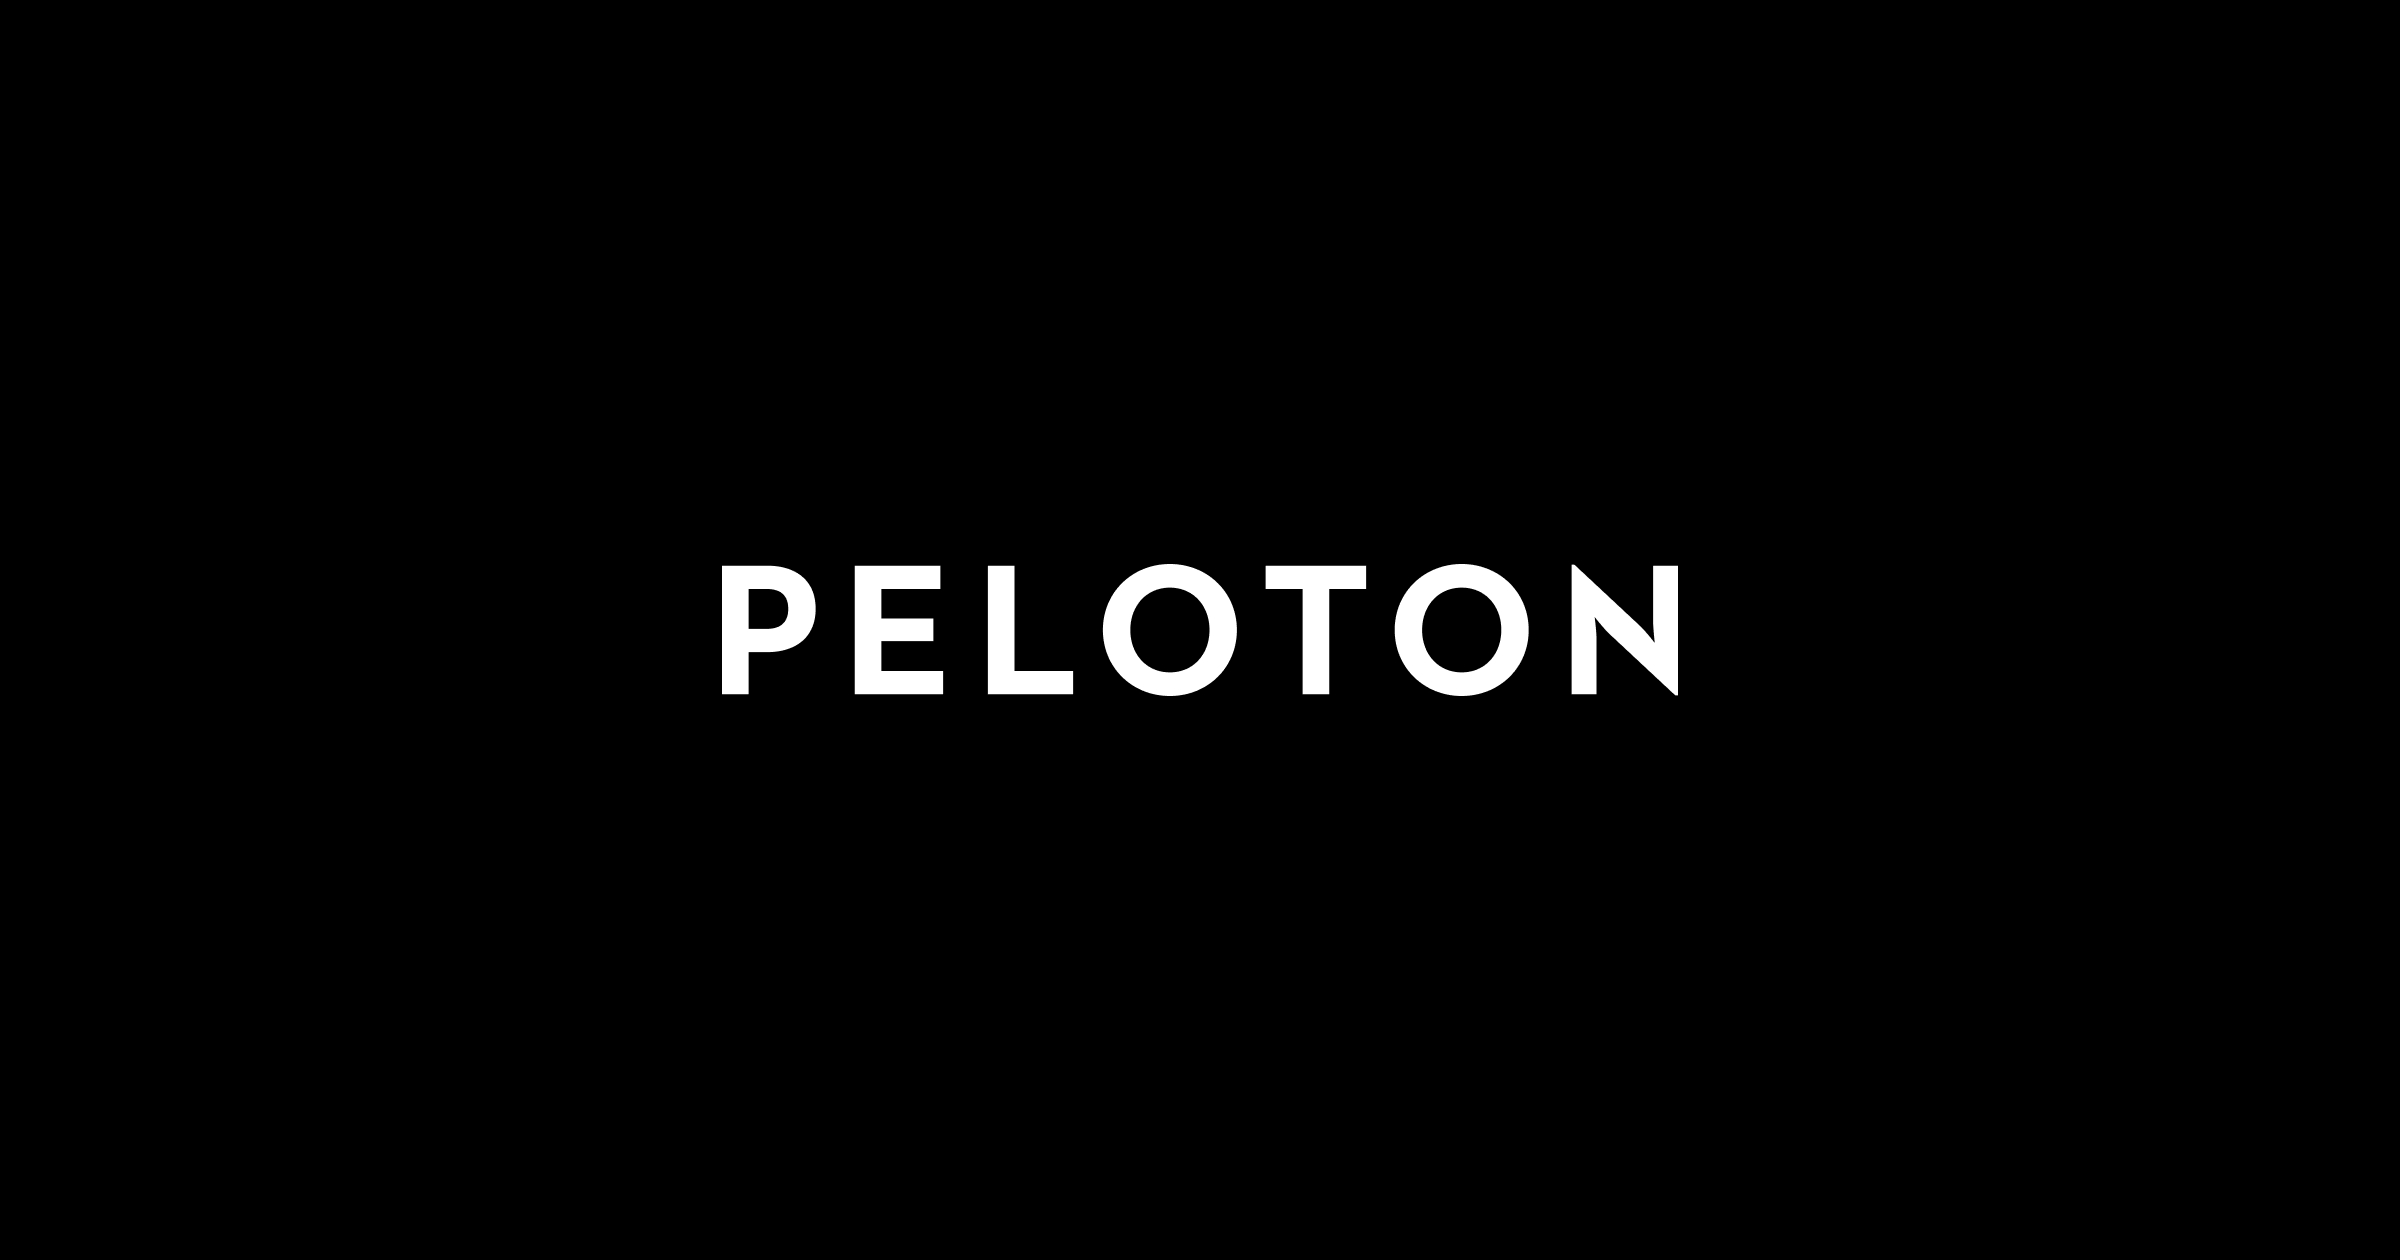 Peloton®  Exercise Bike With Indoor Cycling Classes Streamed Live